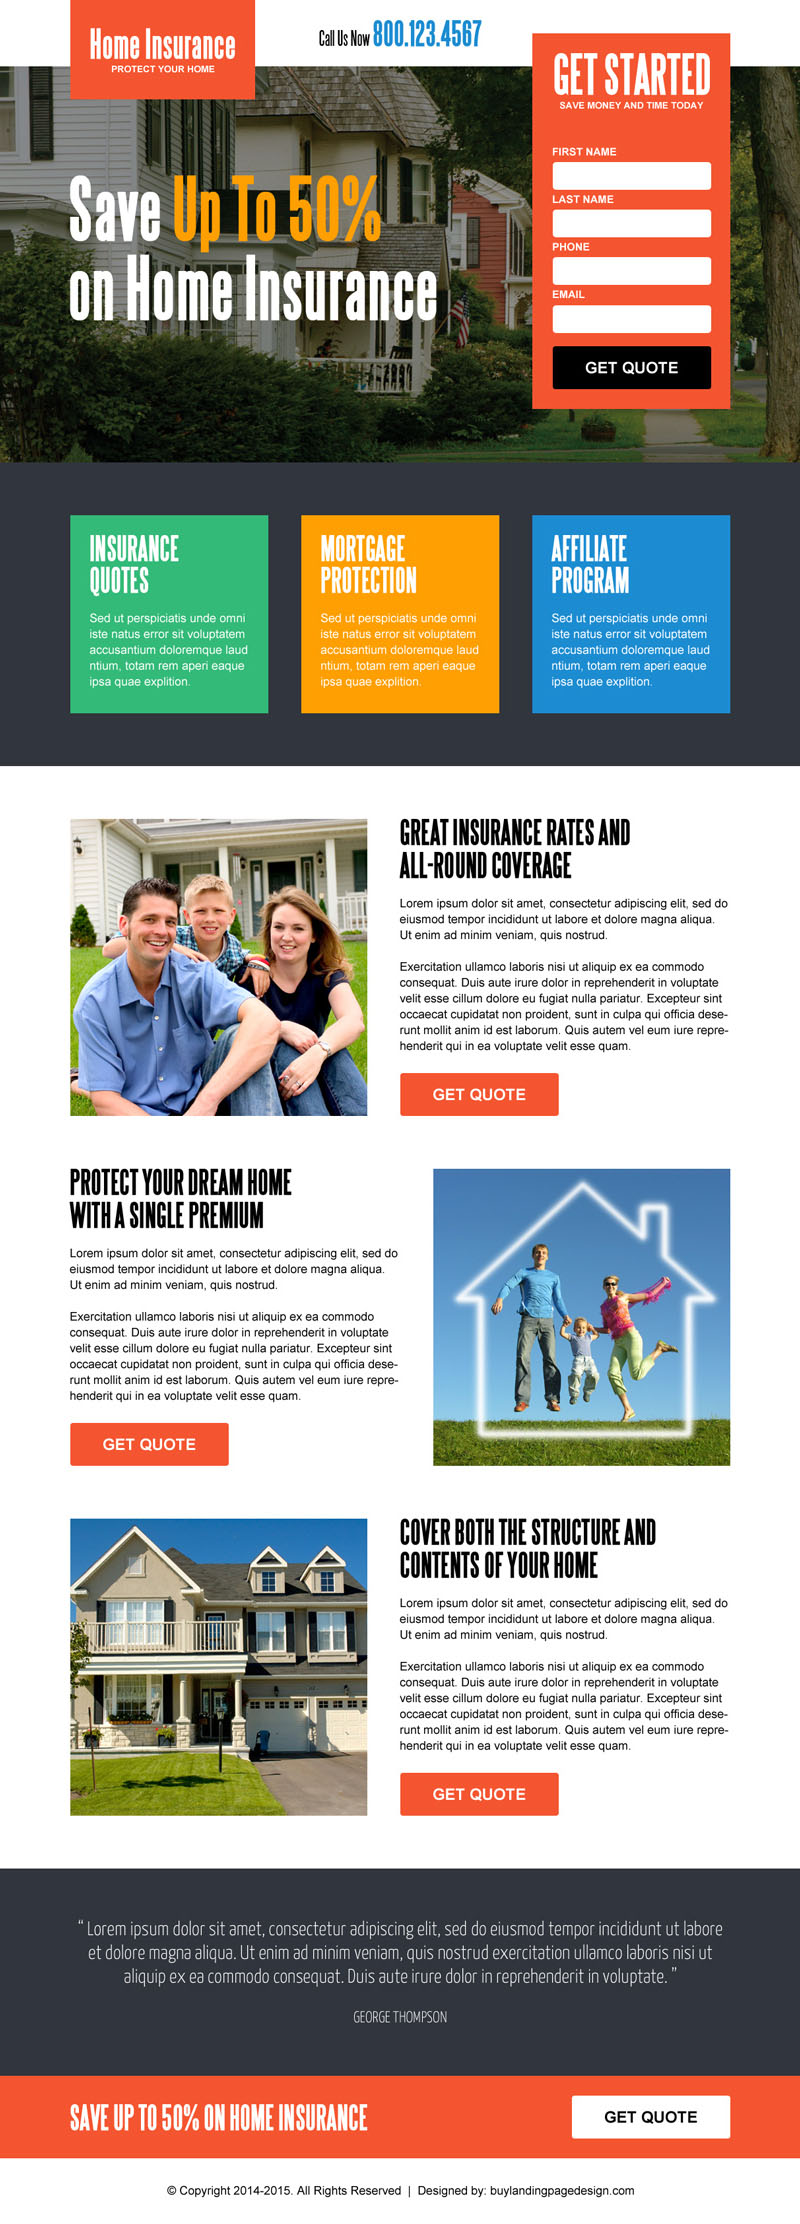 save-money-on-home-insurance-lead-capture-converting-landing-page-design-templates-024